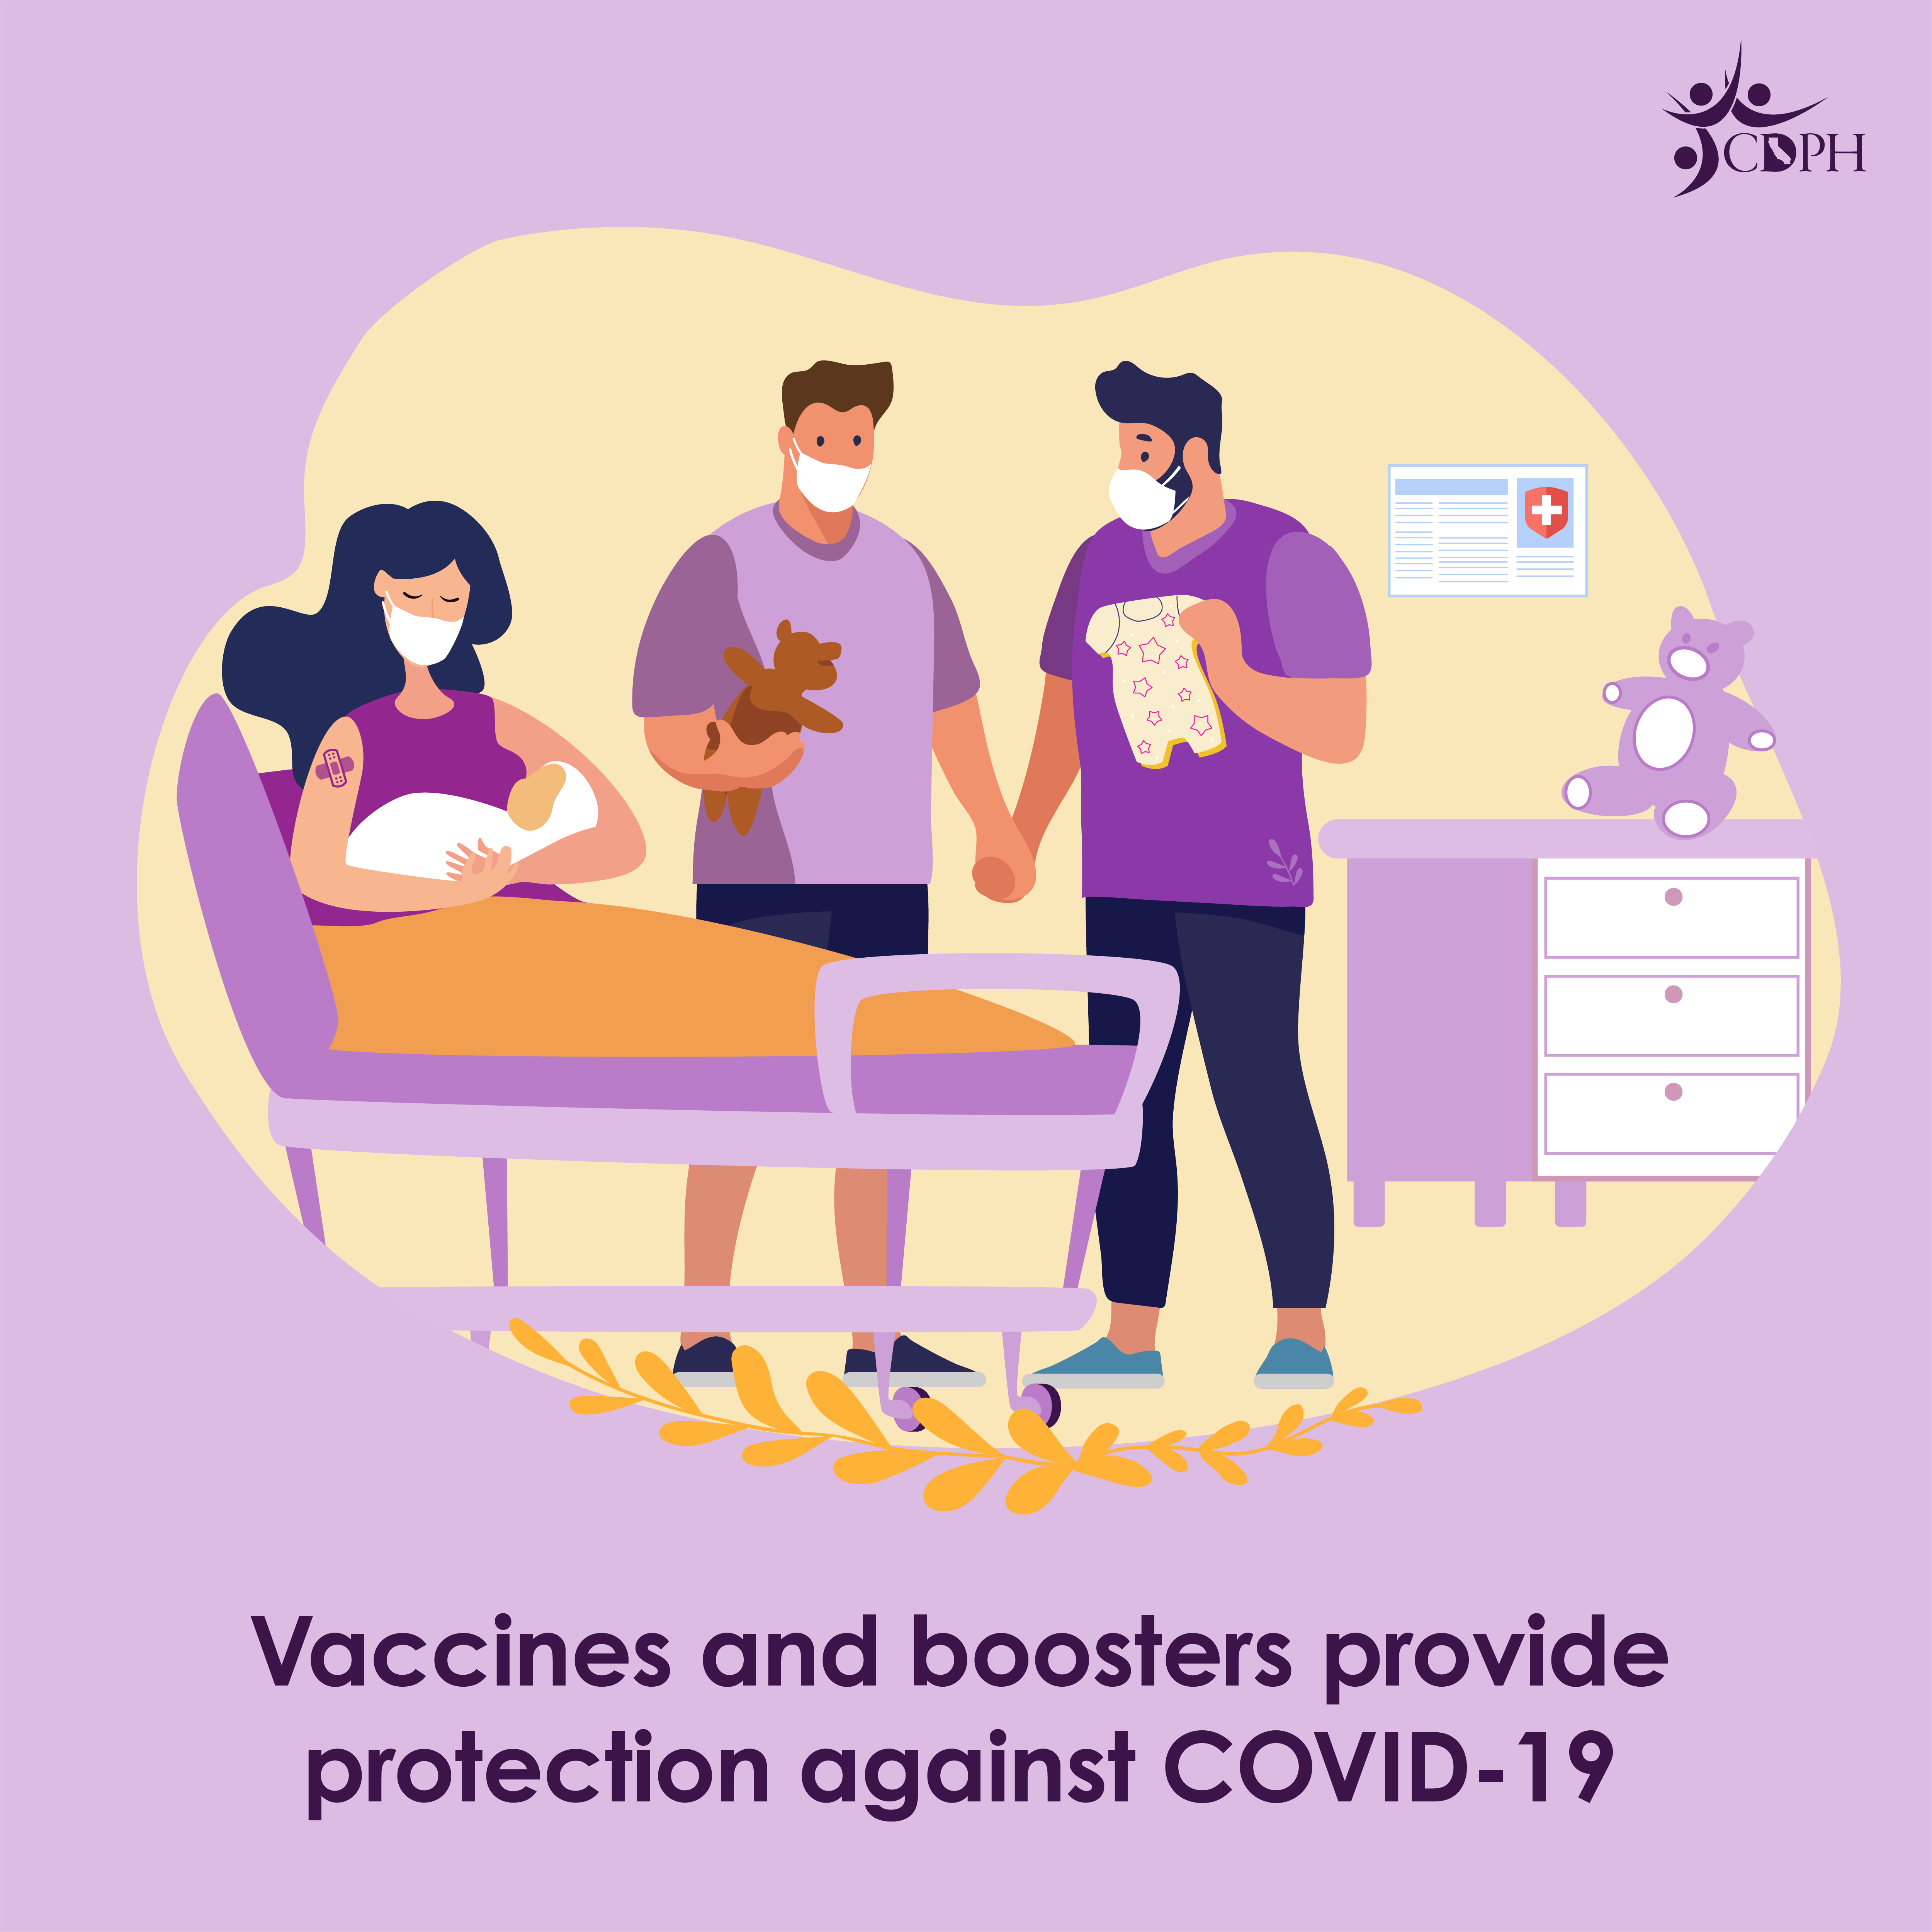 Vaccines and boosters provide protection against OVID-19